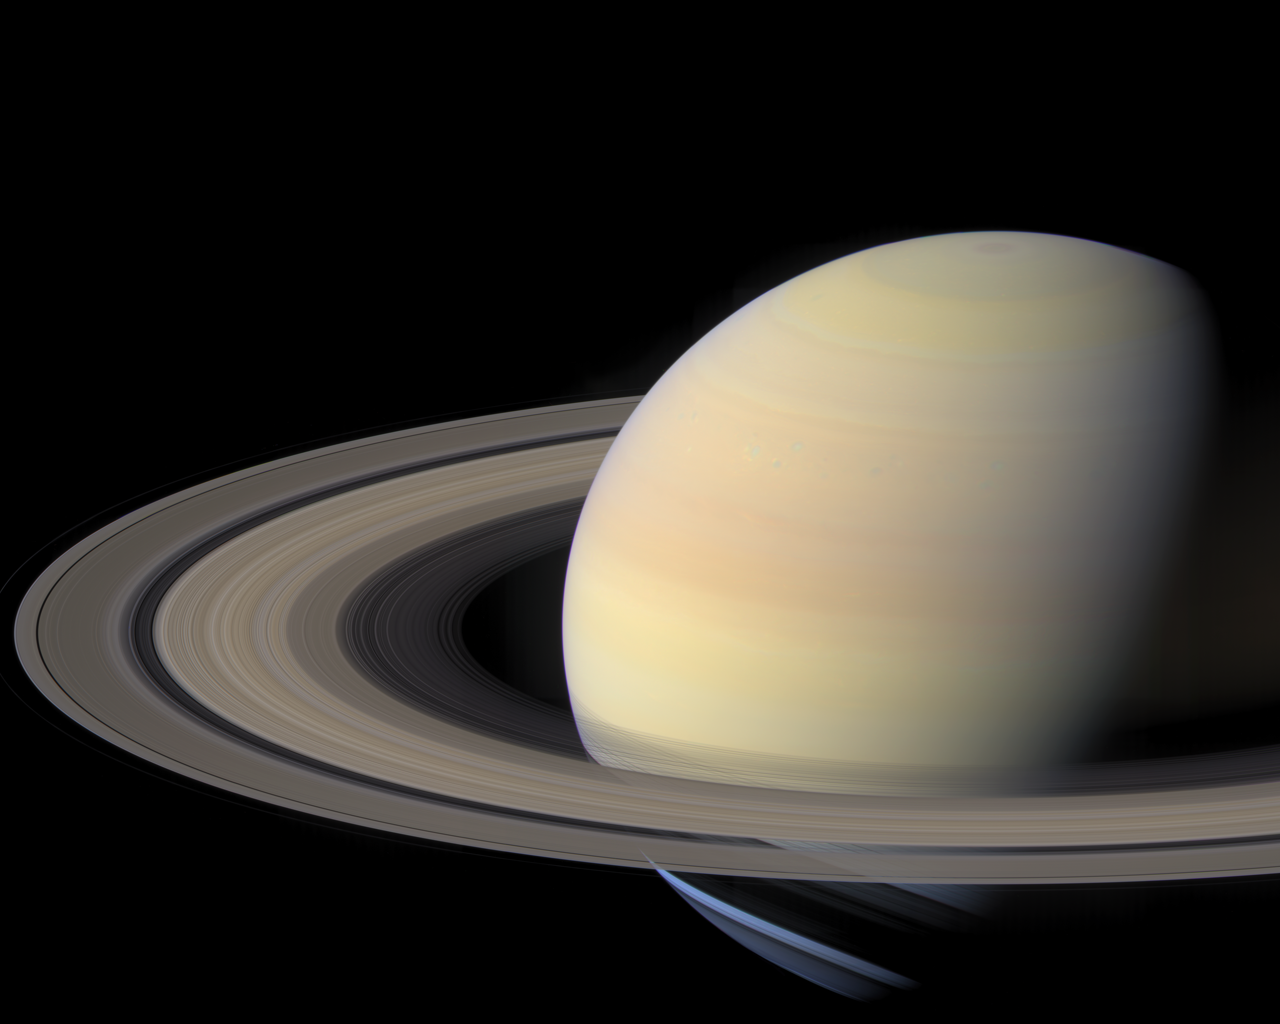 Saturn Background Wallpaper - Best Telescope Images Of Planets - 1280x1024  Wallpaper 